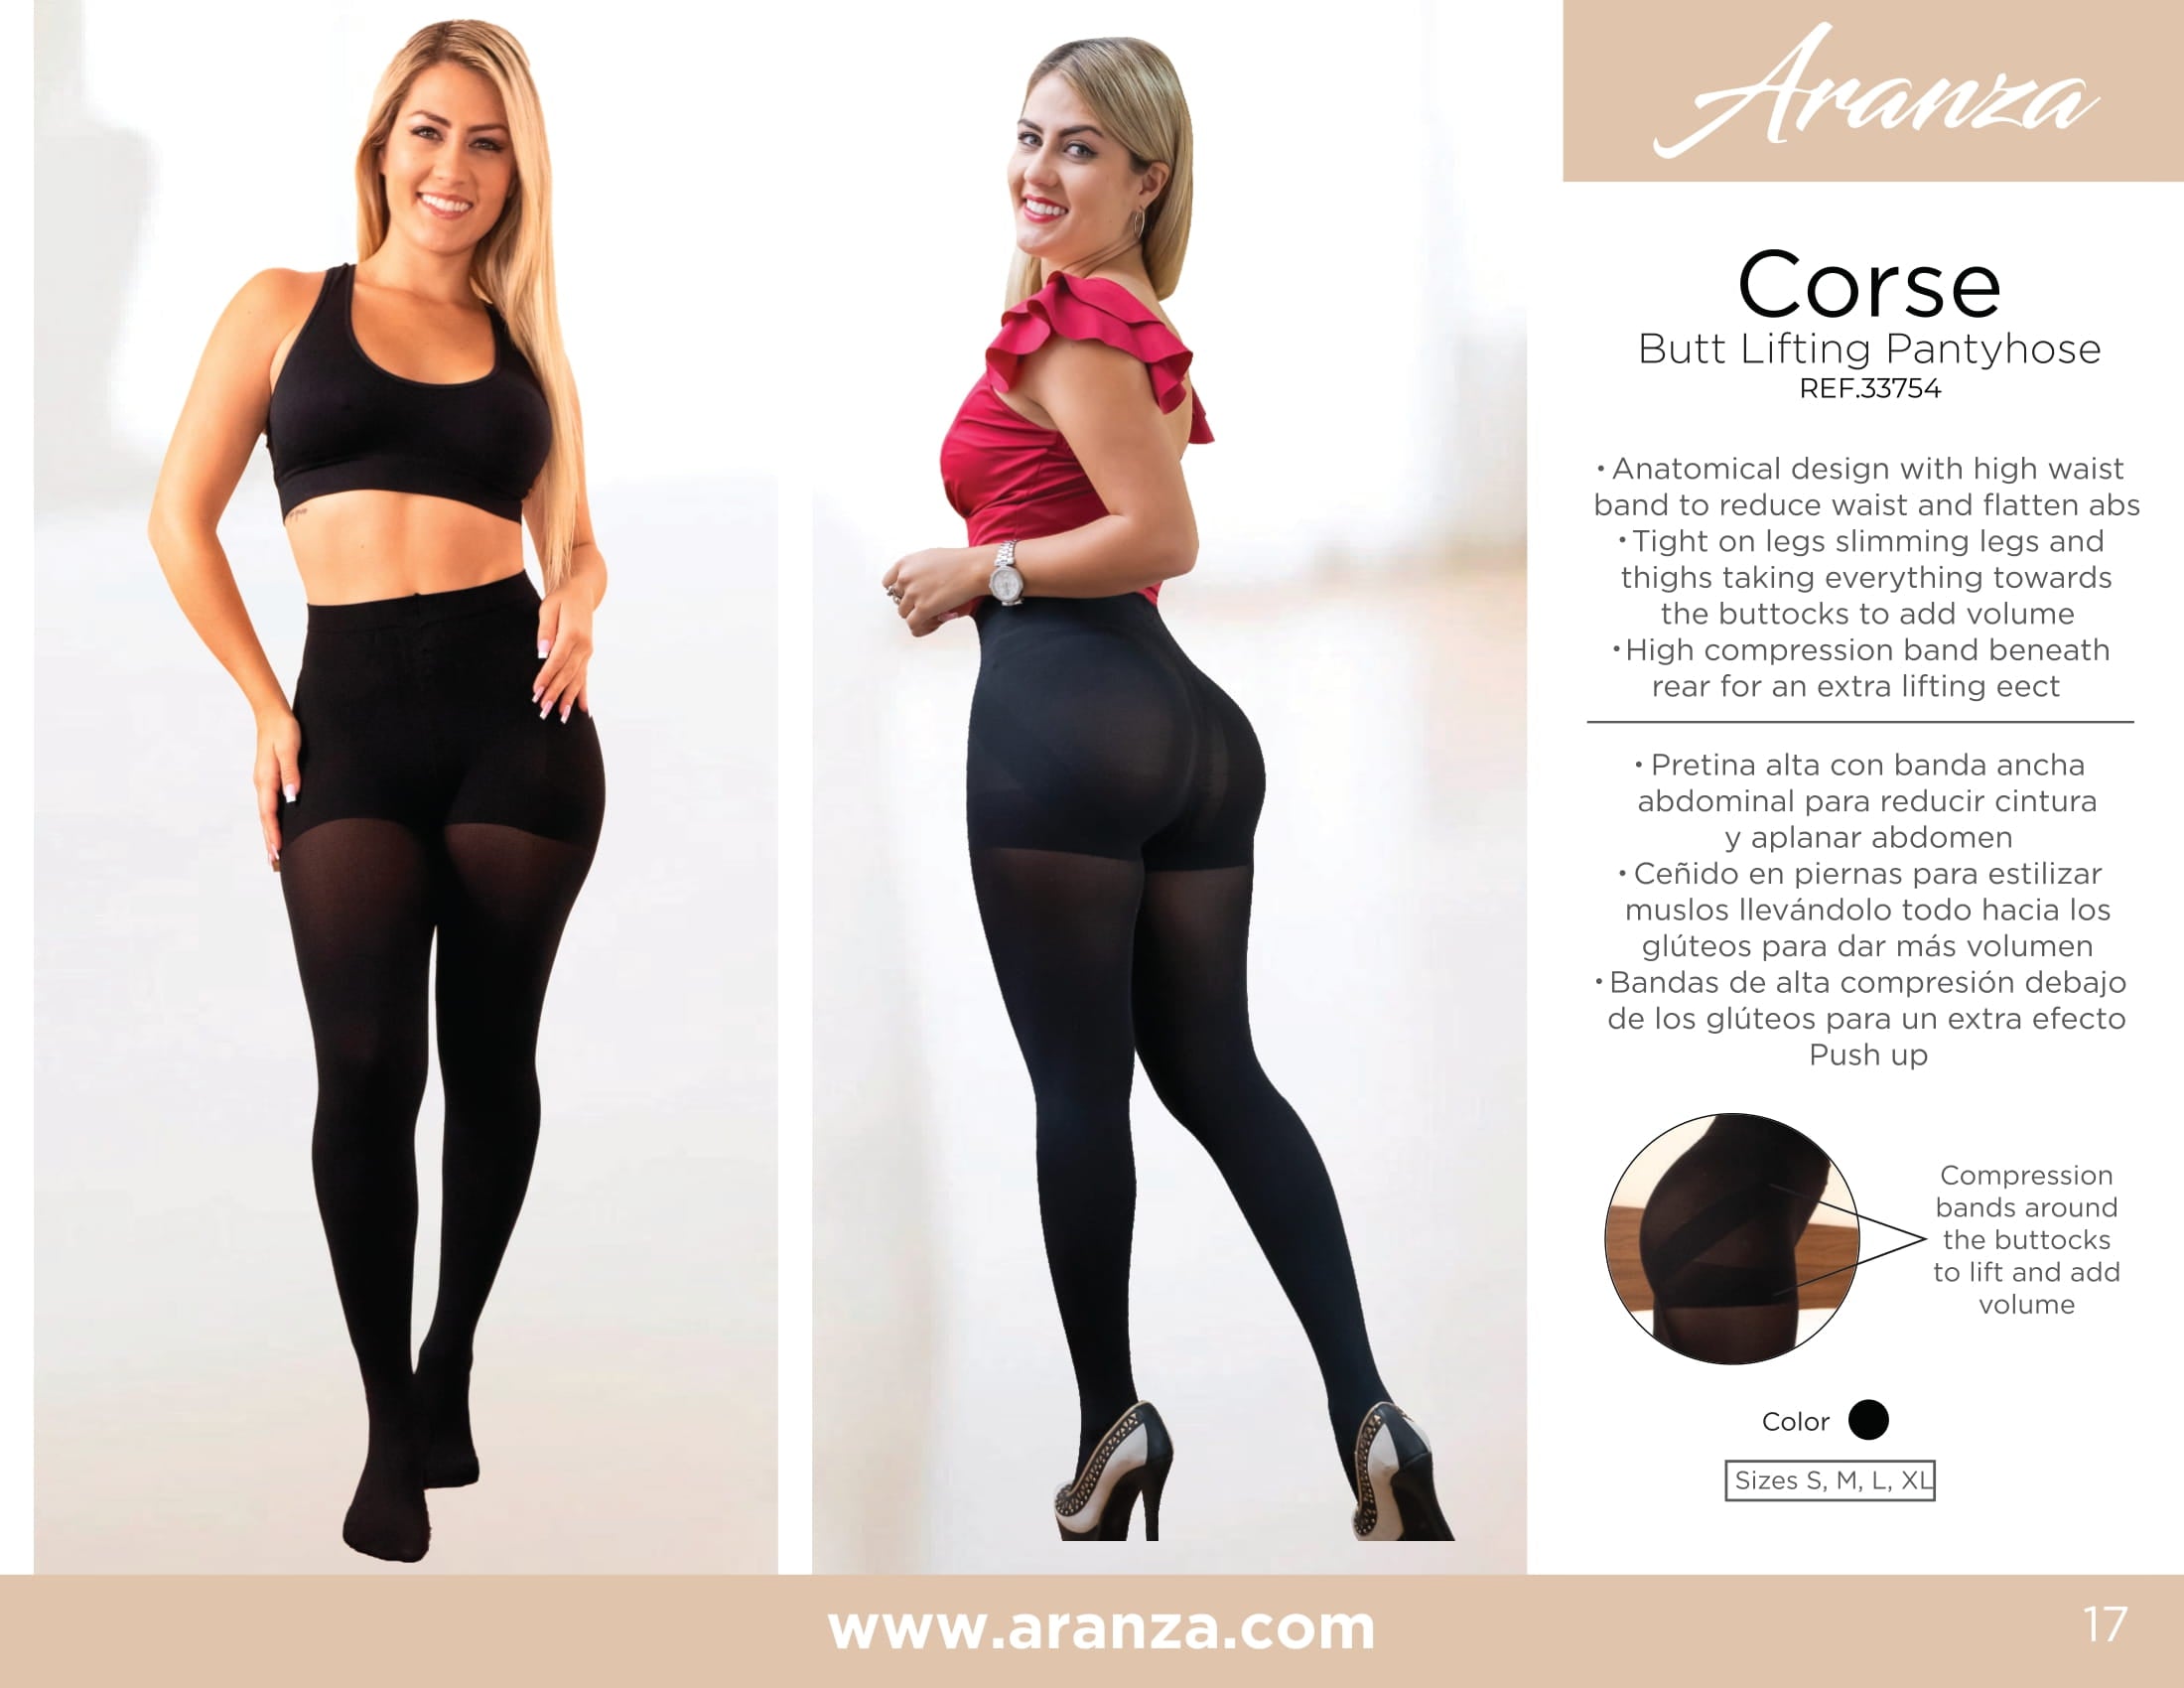 Catalog, Women's Bodysuits, Shapers and Trainers